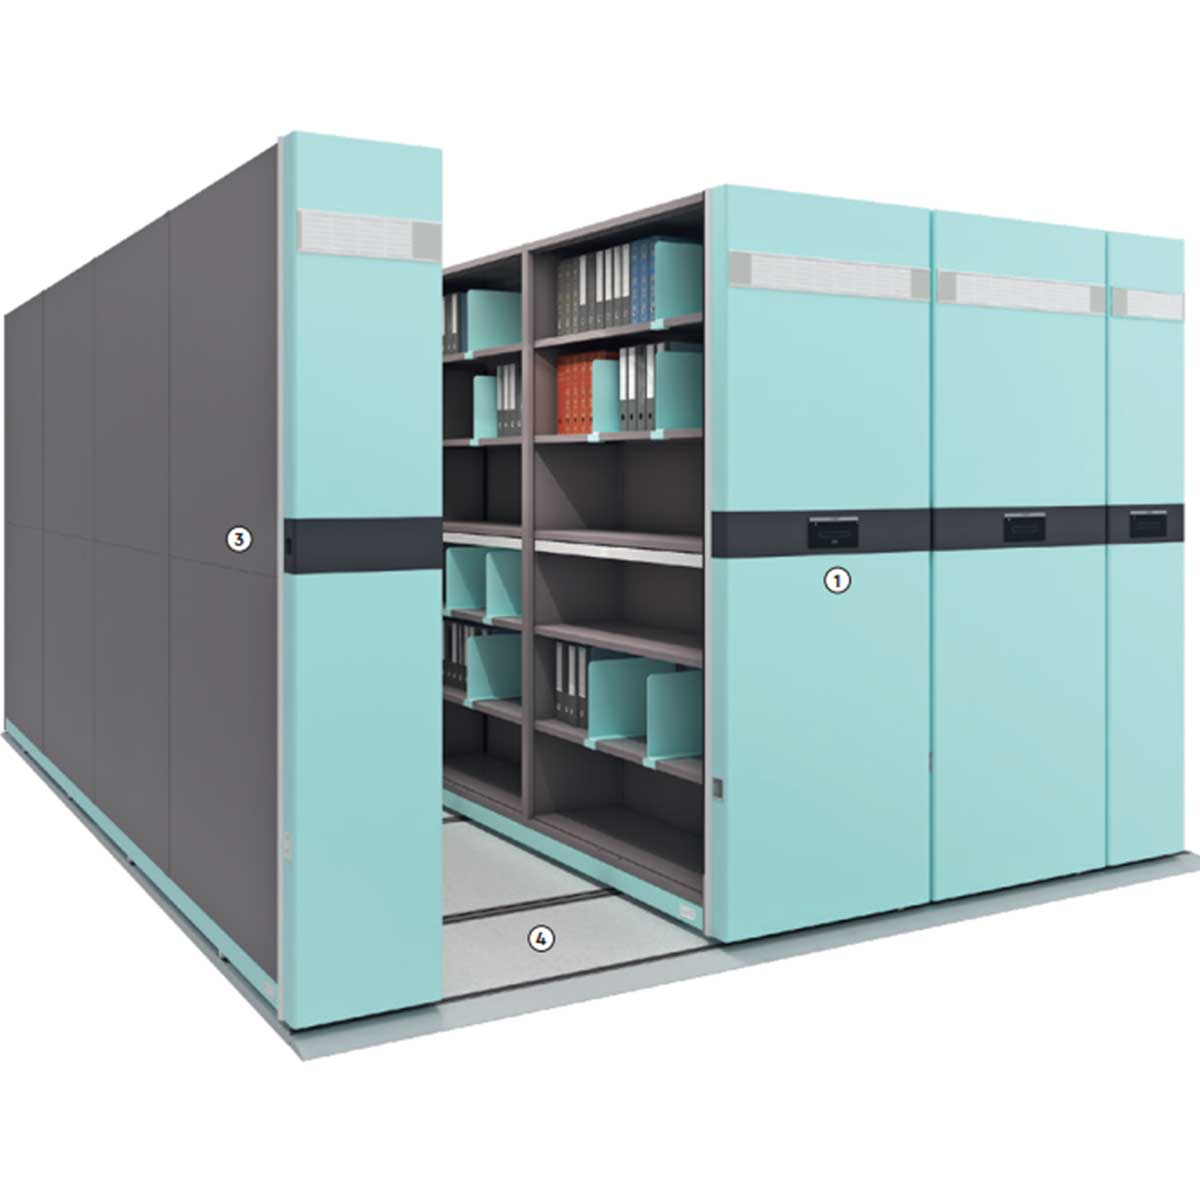 Mobile compactor storage Manufacturers, Suppliers in Dwarka Sector 15